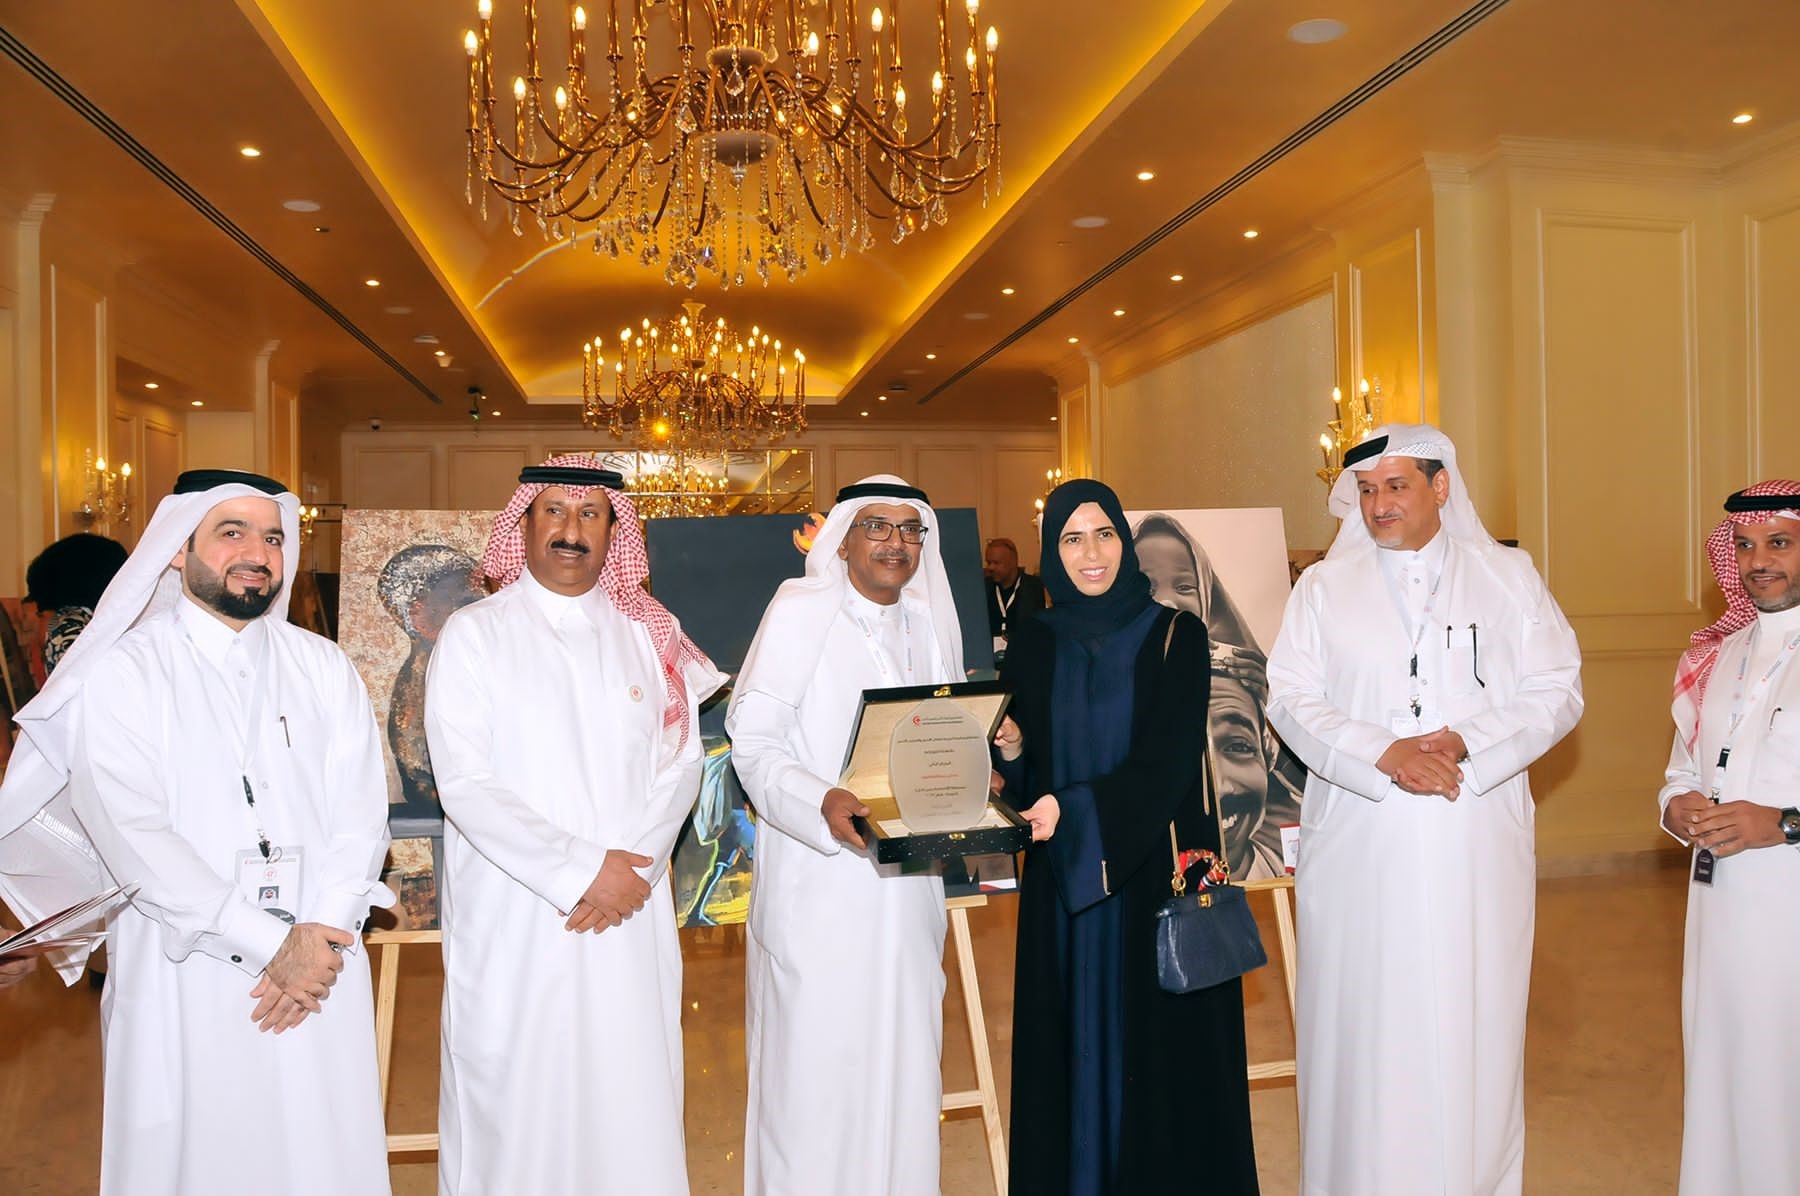 Kuwaiti photographer wins second place ARCO award for best picture